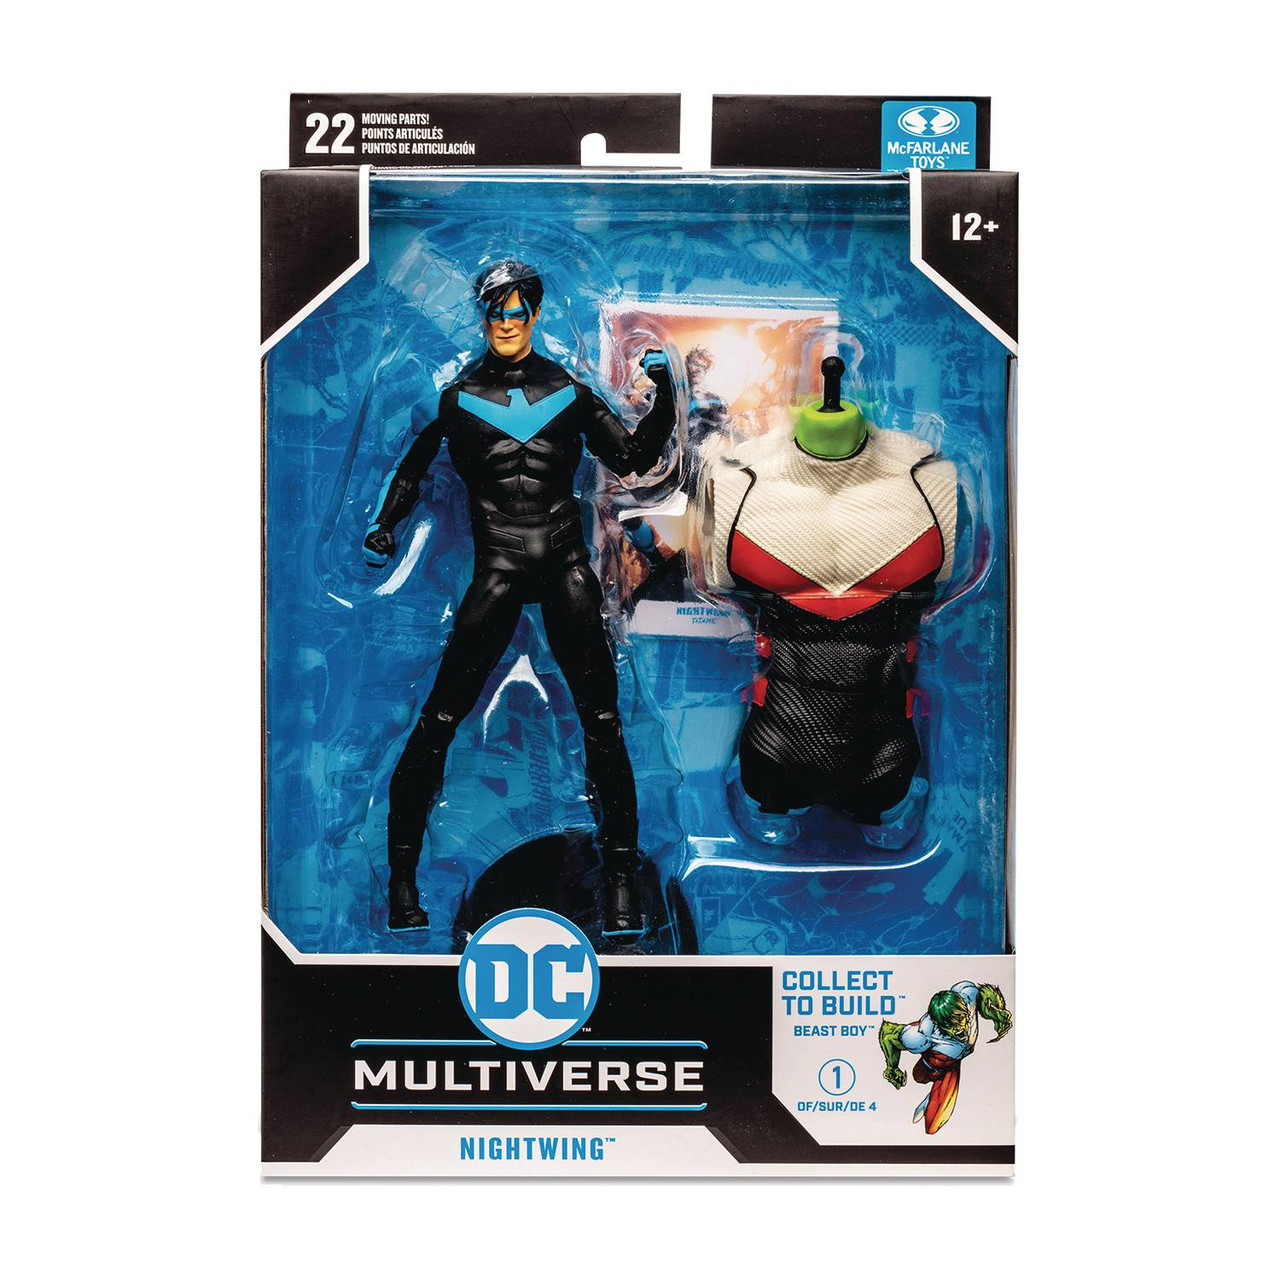 McFarlane DC Multiverse TITANS Nightwing 7in Action Figure